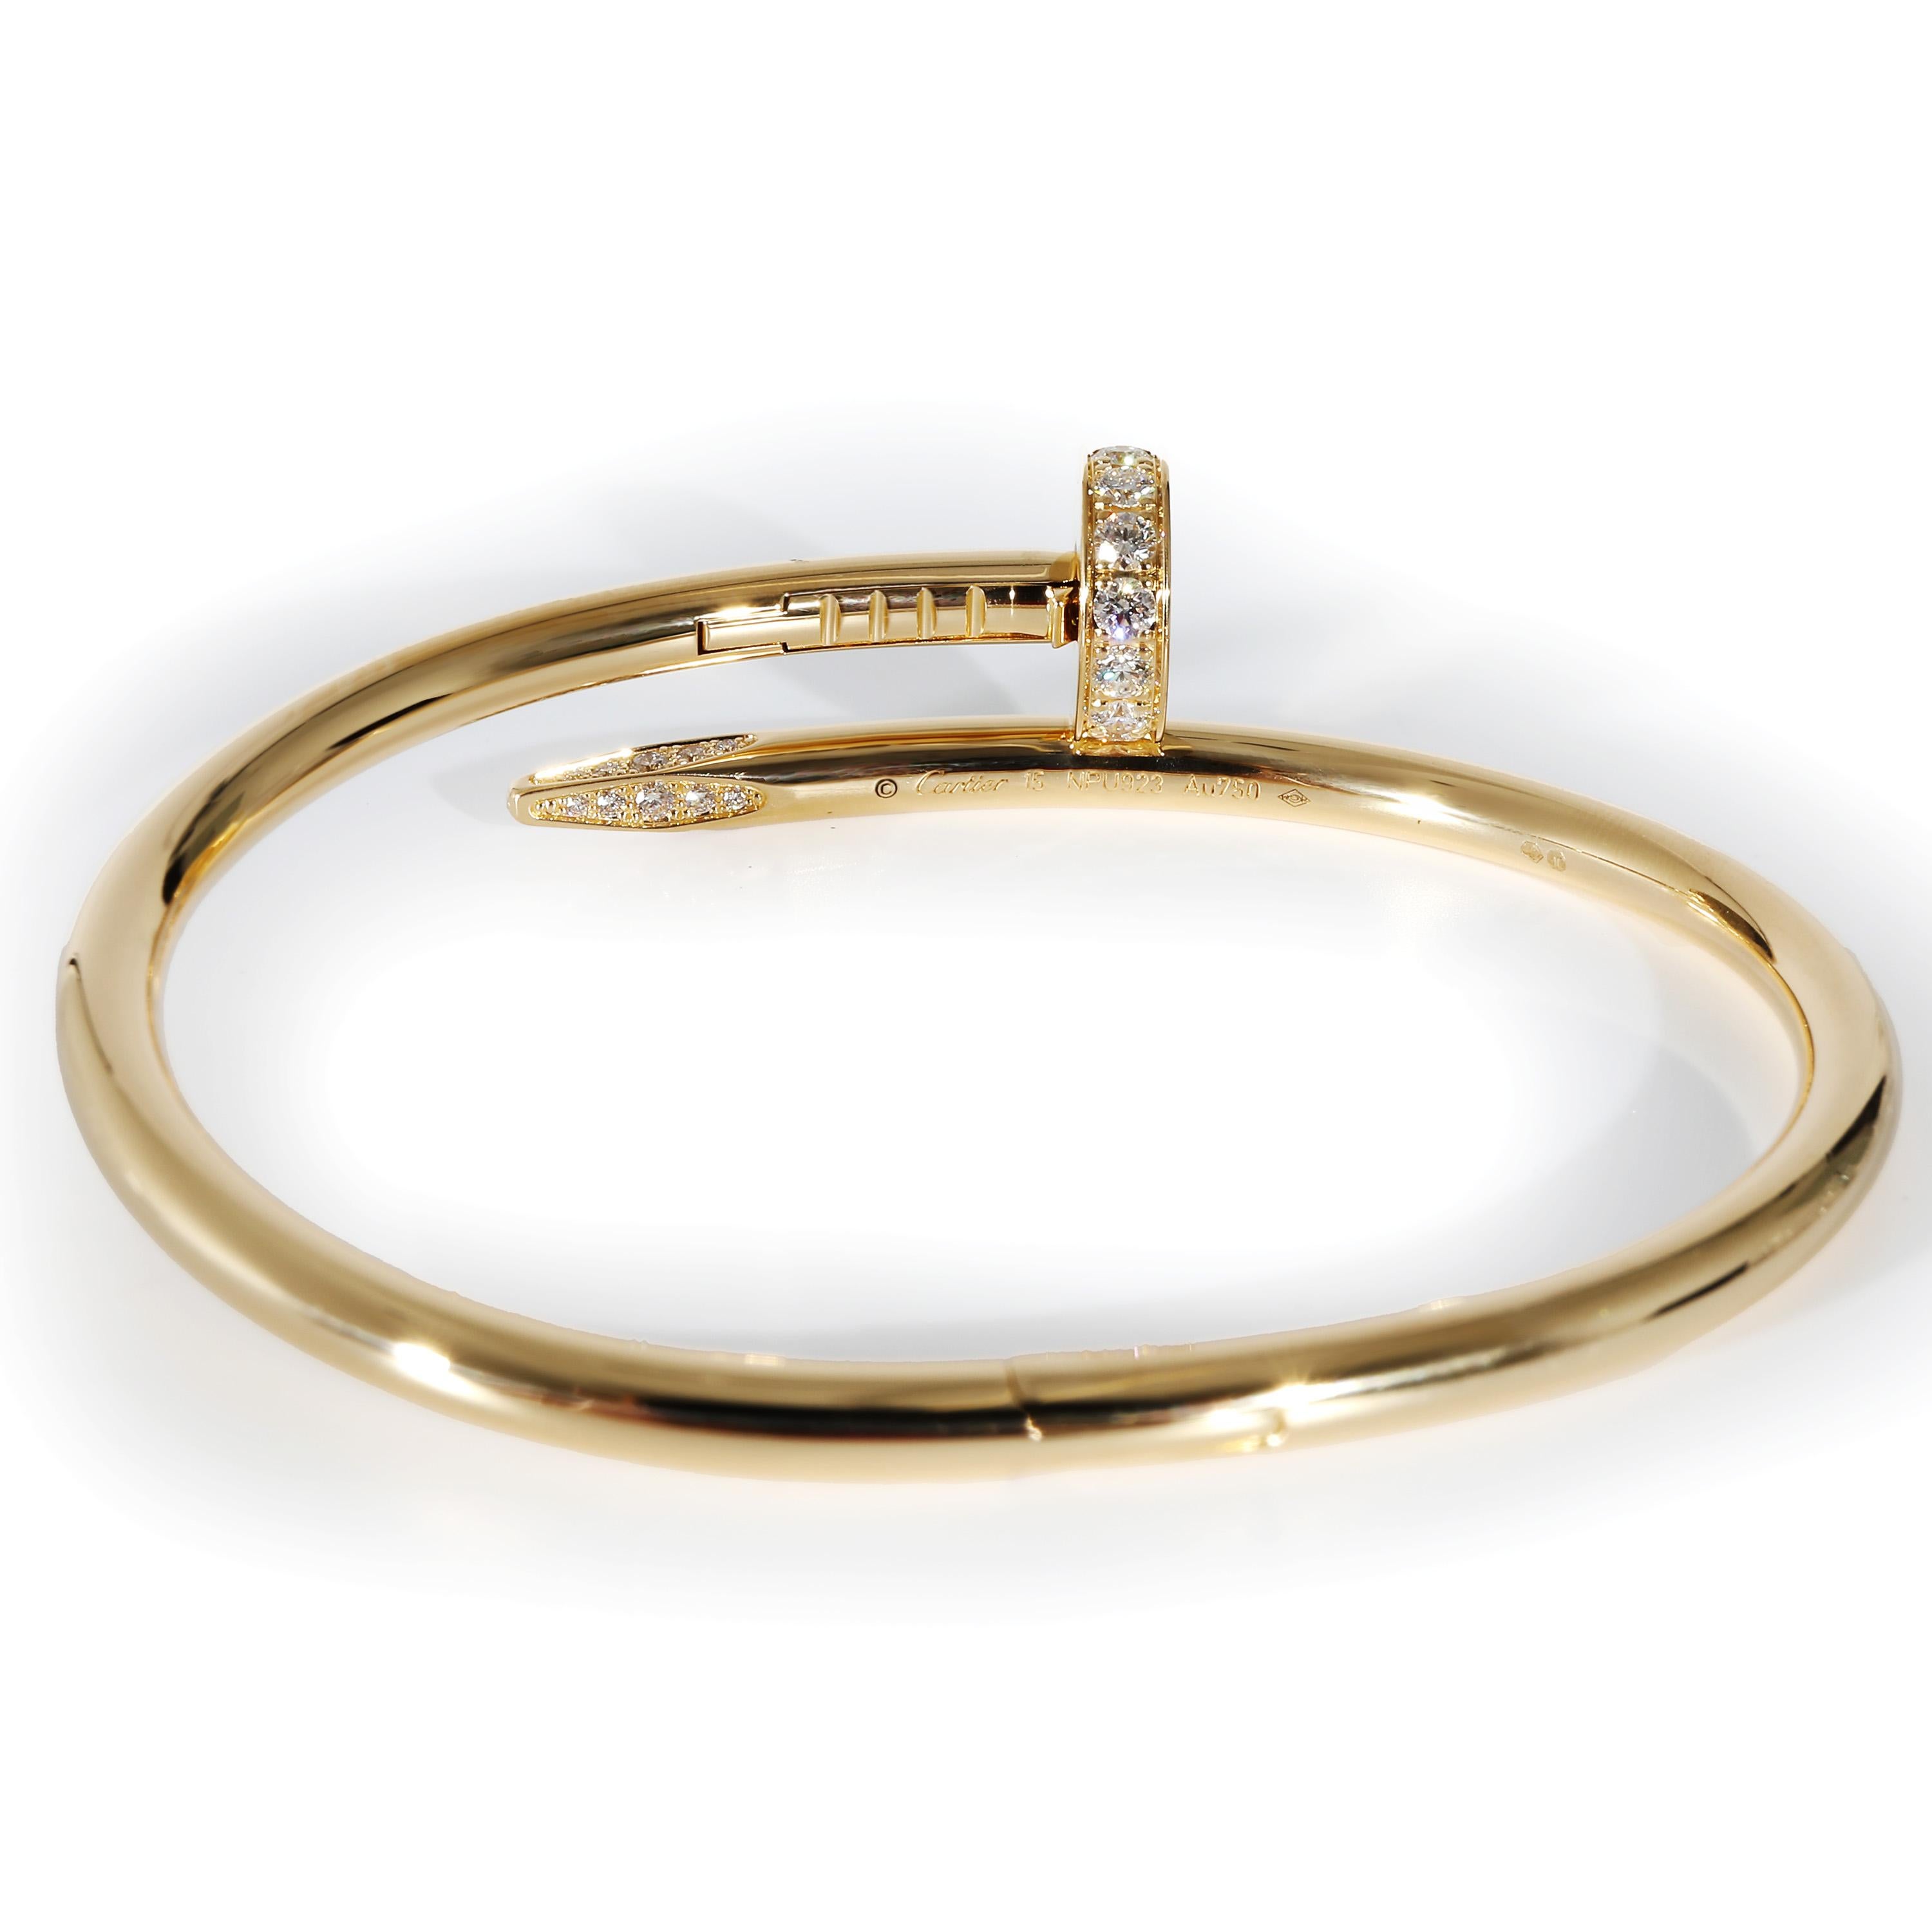 Cartier Juste Un Clou Bracelet in 18k Yellow Gold 0.58 CTW

PRIMARY DETAILS
SKU: 133209
Listing Title: Cartier Juste Un Clou Bracelet in 18k Yellow Gold 0.58 CTW
Condition Description: Translating to 'just a nail', the Juste Un Clou collection from